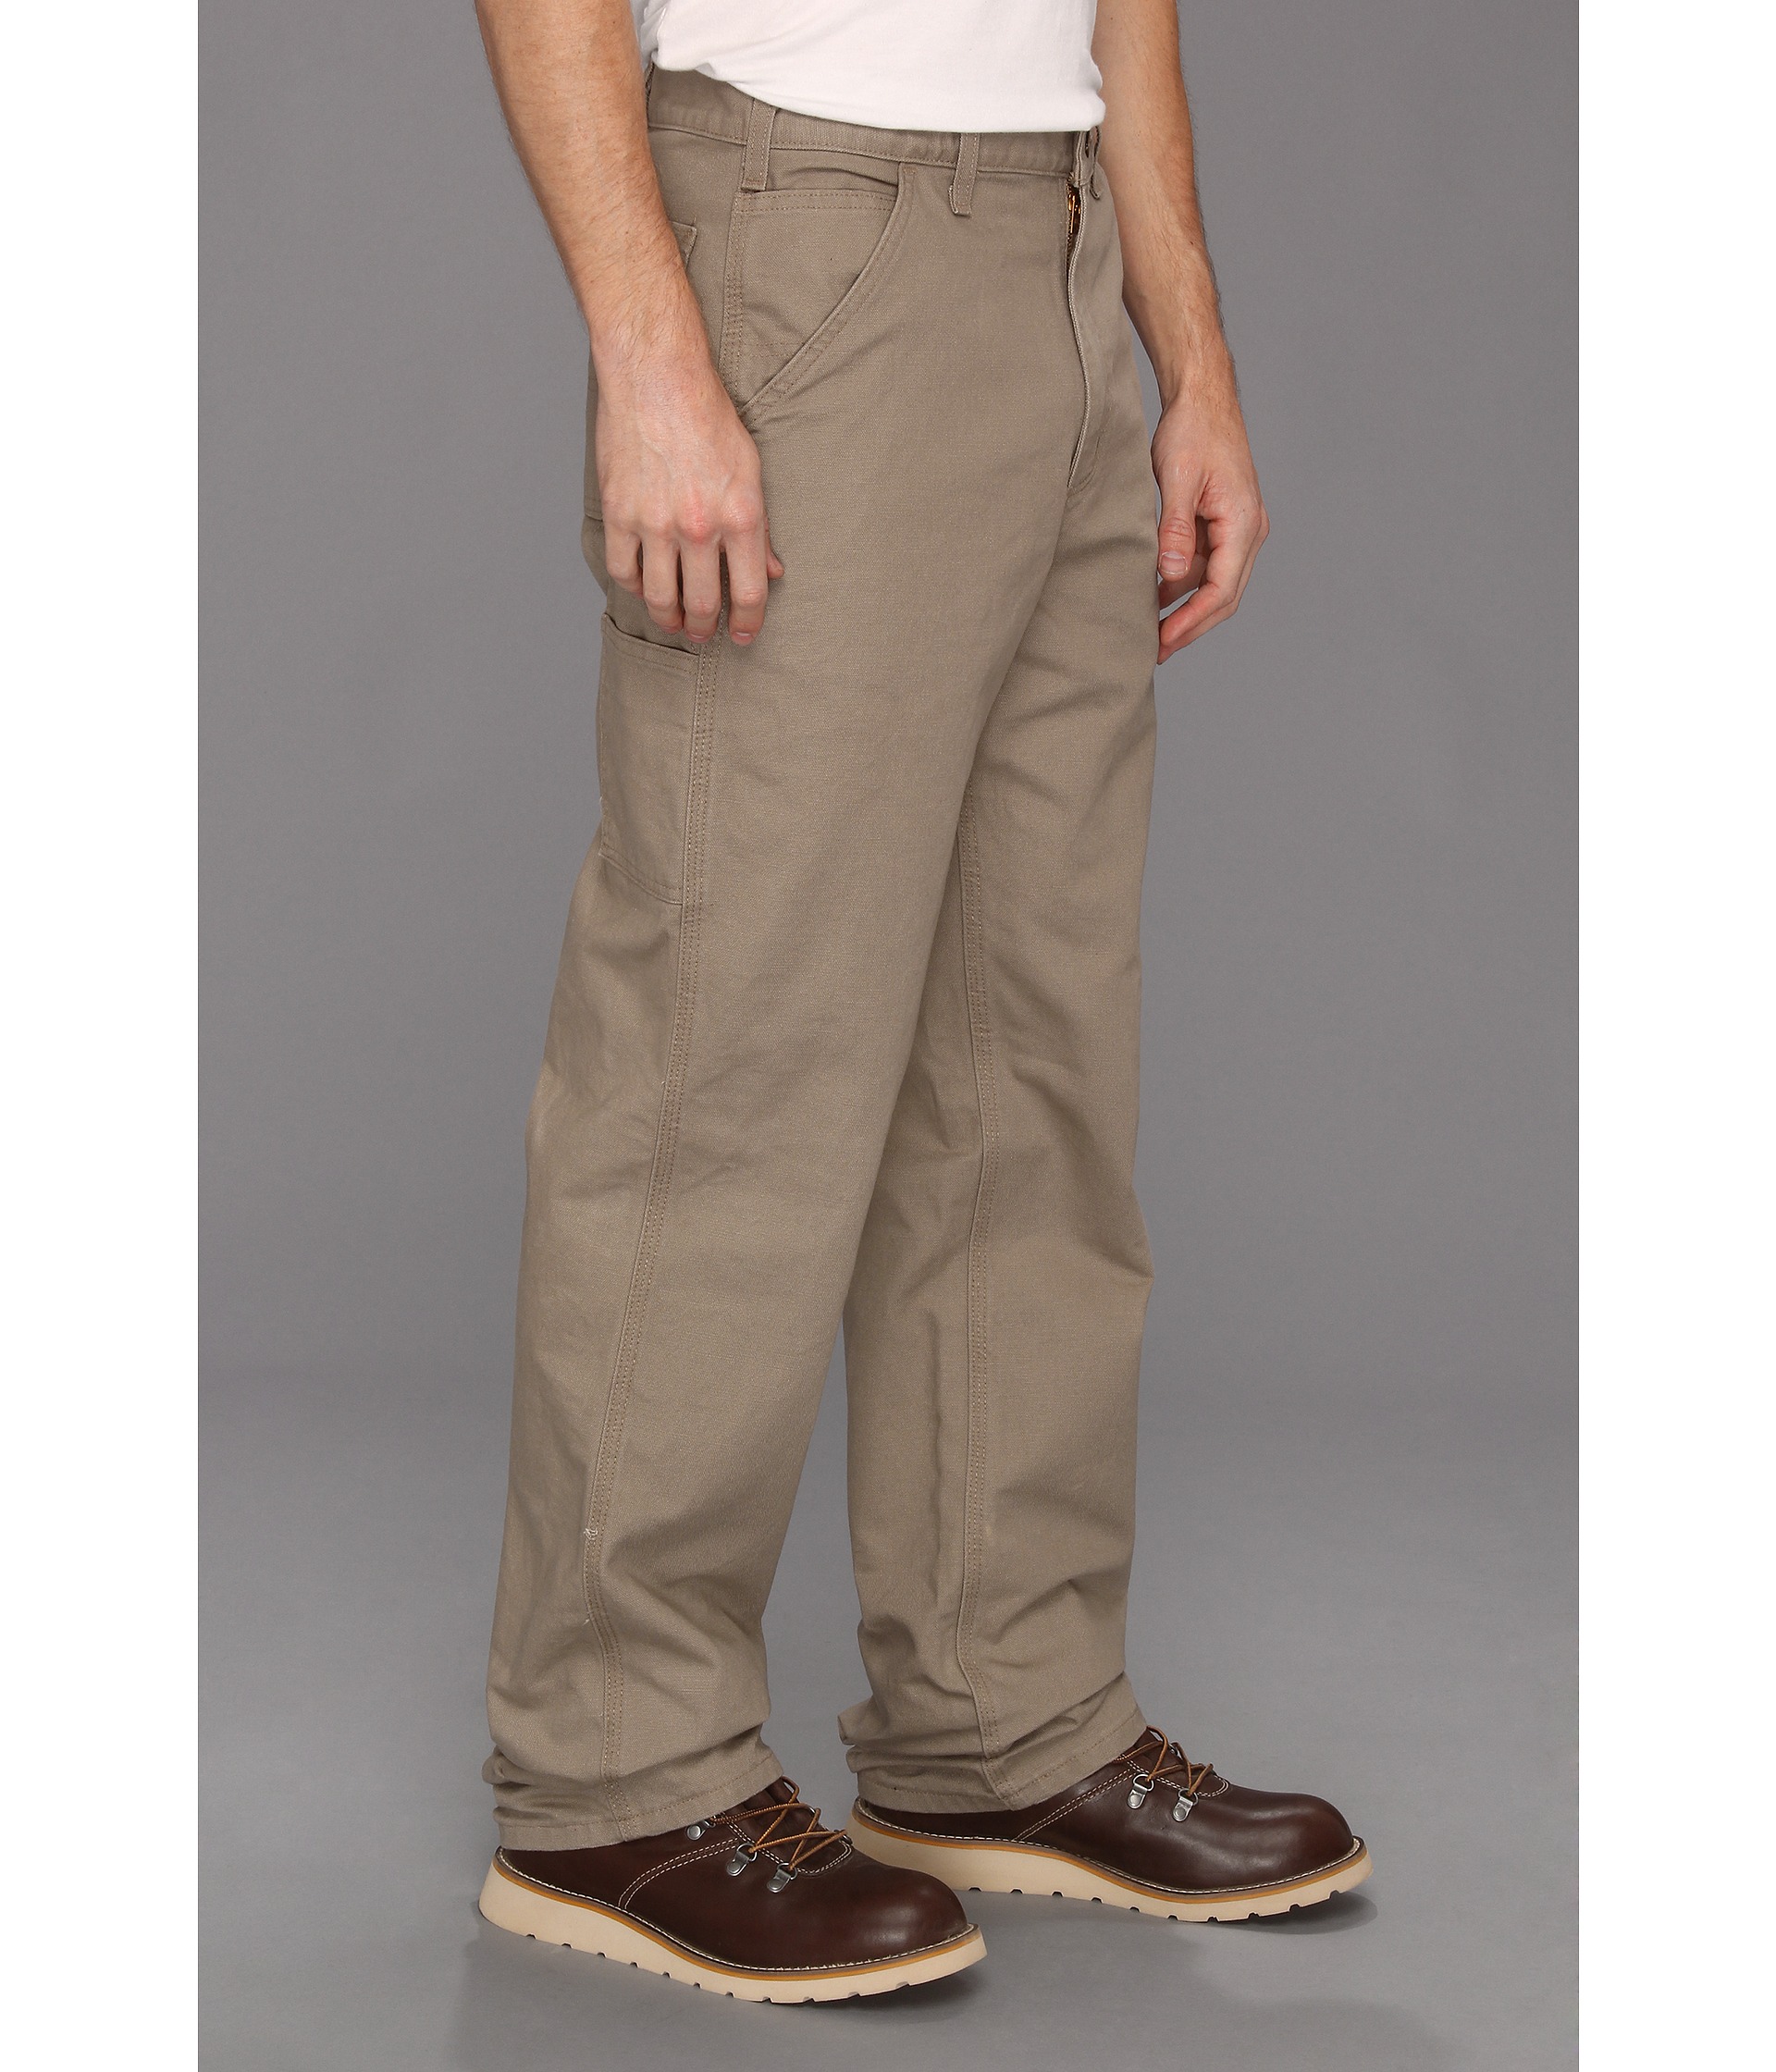 Carhartt Washed Duck Work Dungaree at Zappos.com